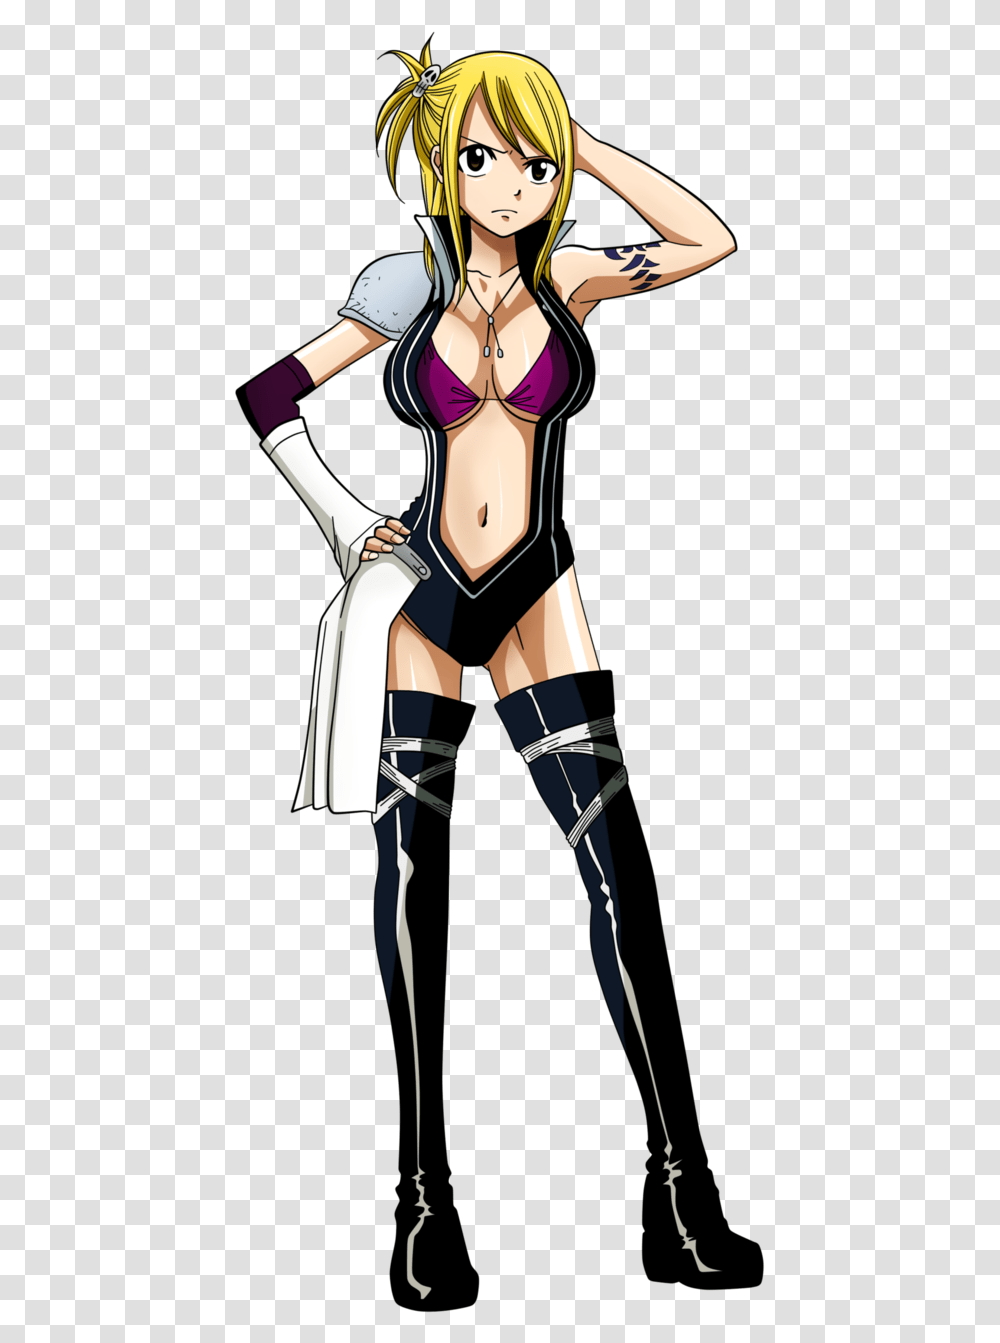 All Worlds Alliance Wiki Fairy Tail Lucy Edolas, Person, Human, Manga, Comics Transparent Png